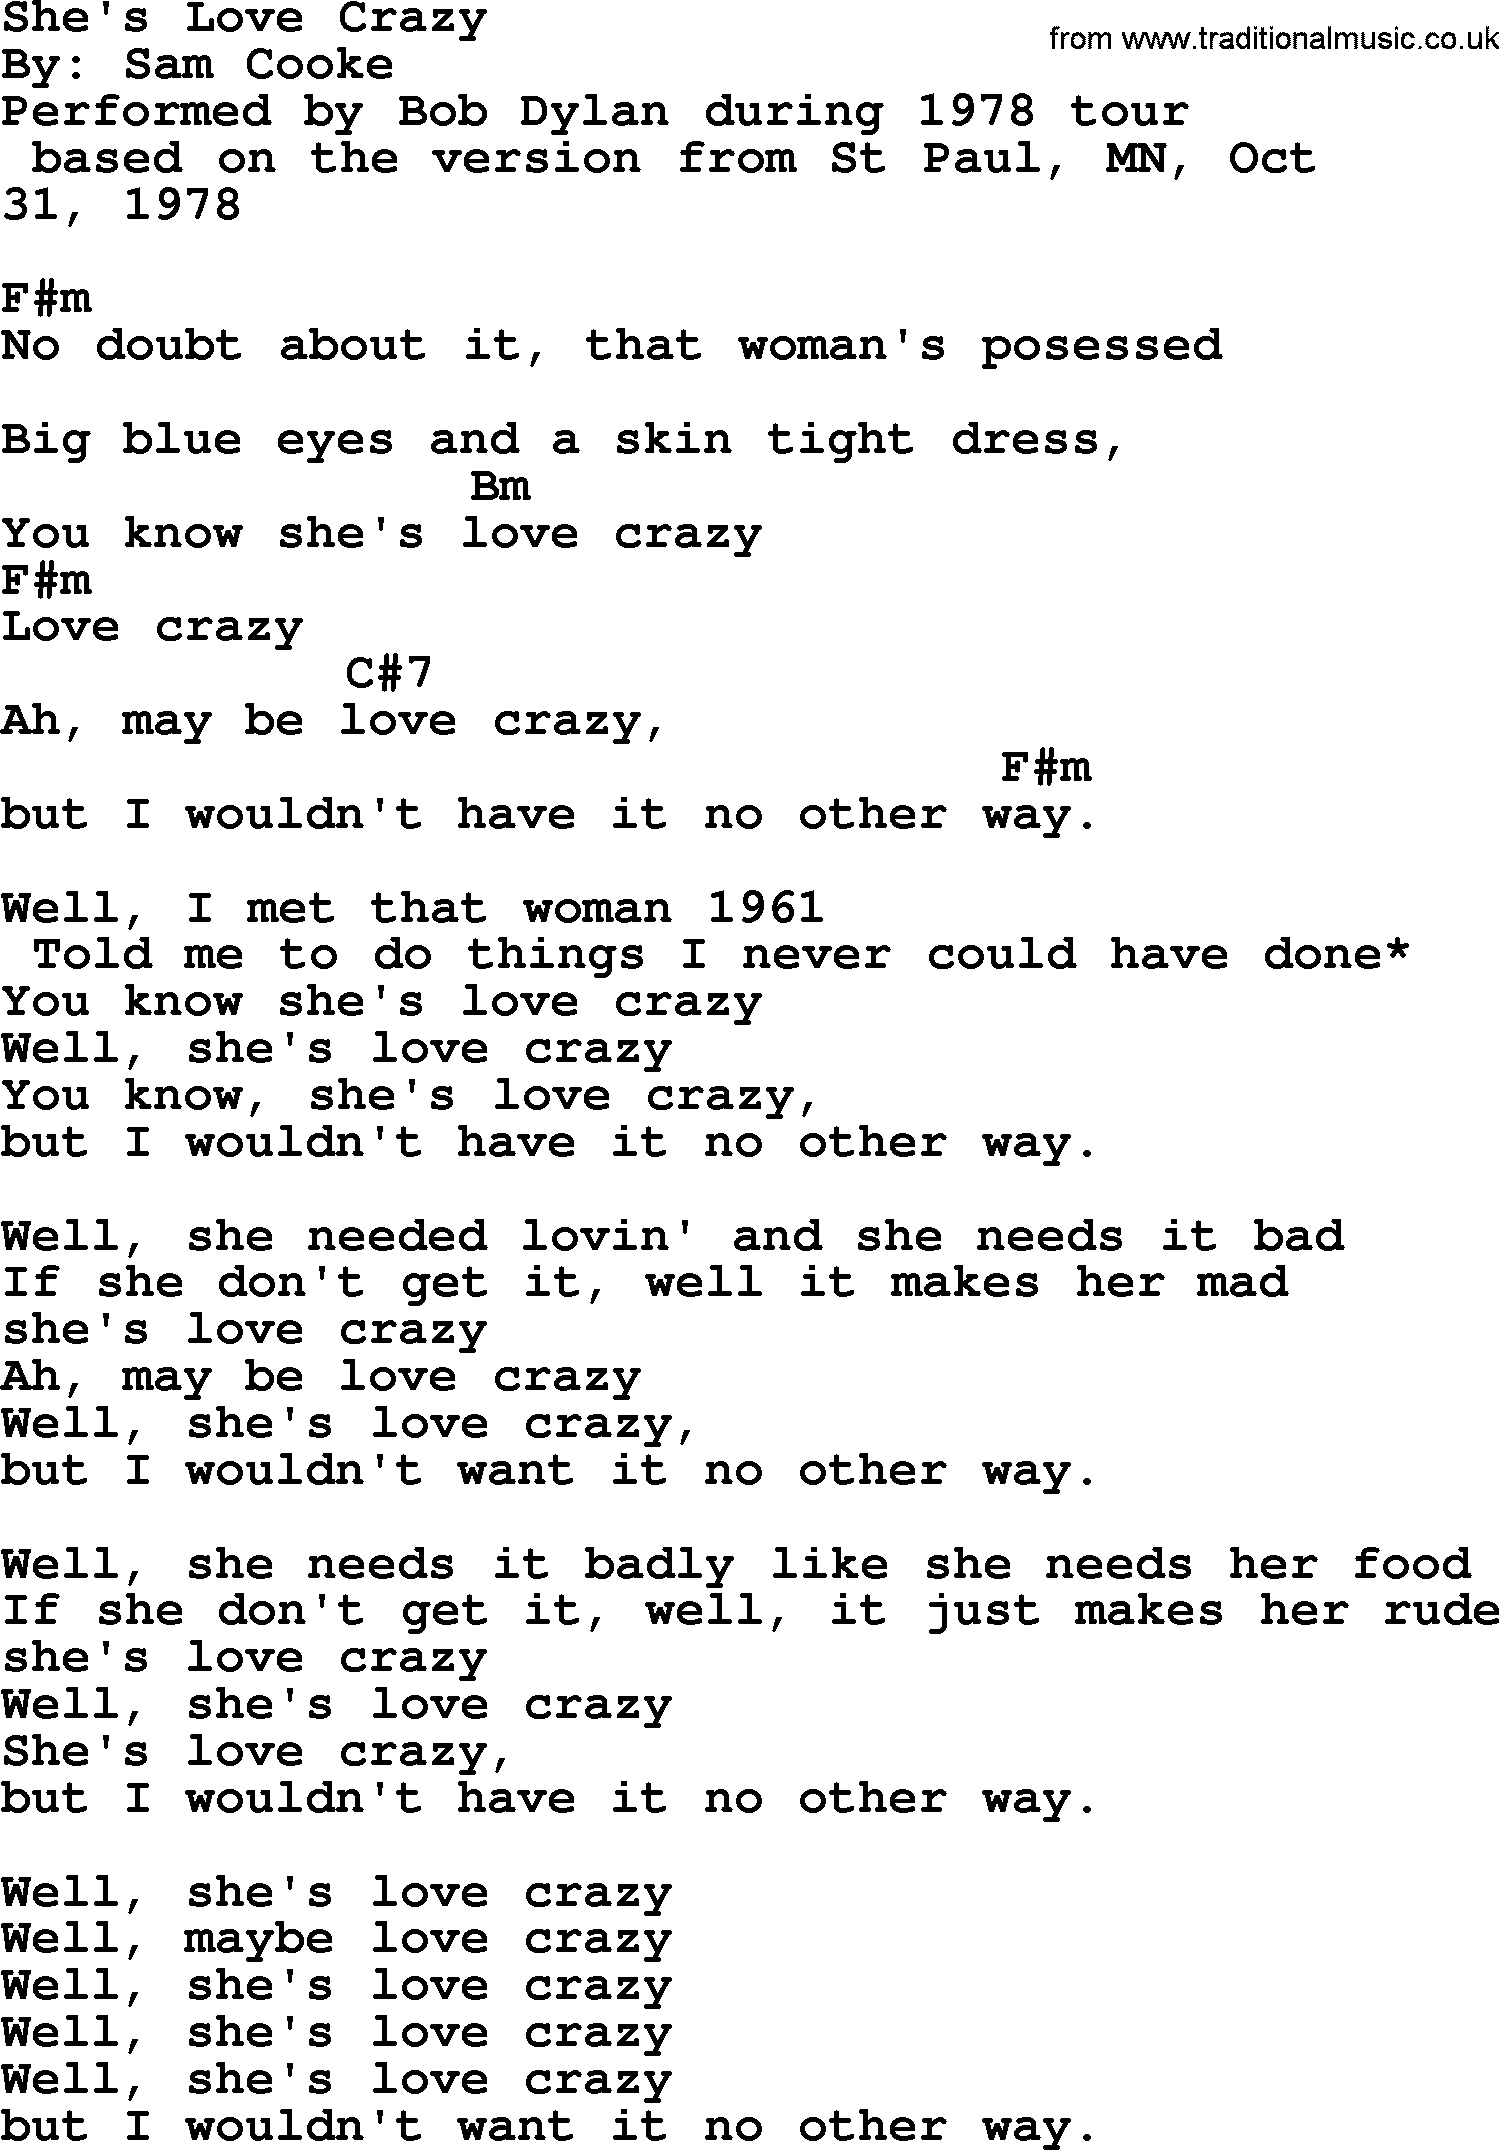 Bob Dylan song, lyrics with chords - She's Love Crazy